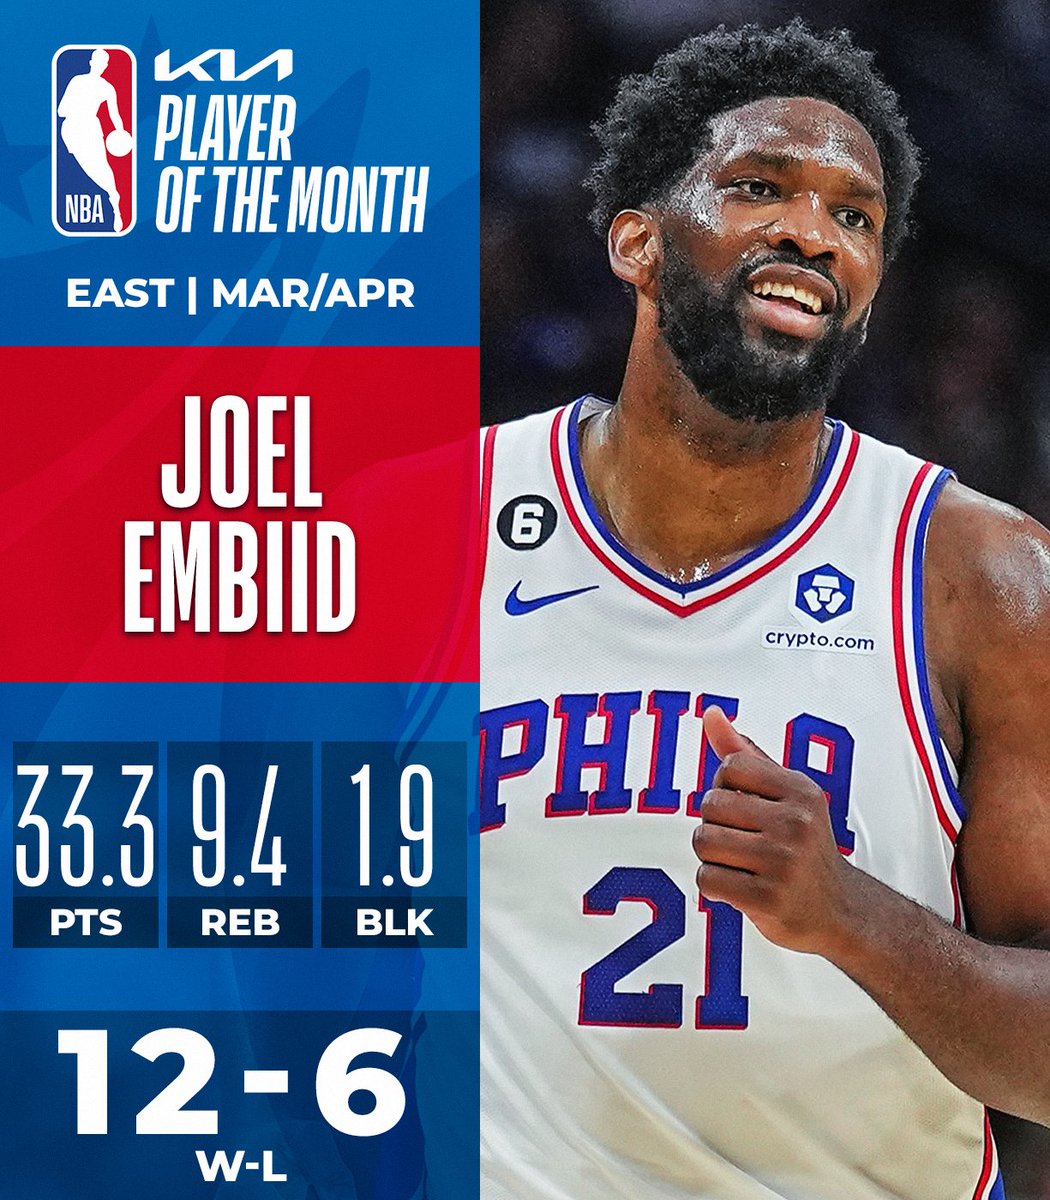 The Kia NBA Players of the Month for March and April! #KiaPOTM     

West: Anthony Davis (LA Lakers)  
East: Joel Embiid (76ers)

#LakeShow #BrotherlyLove